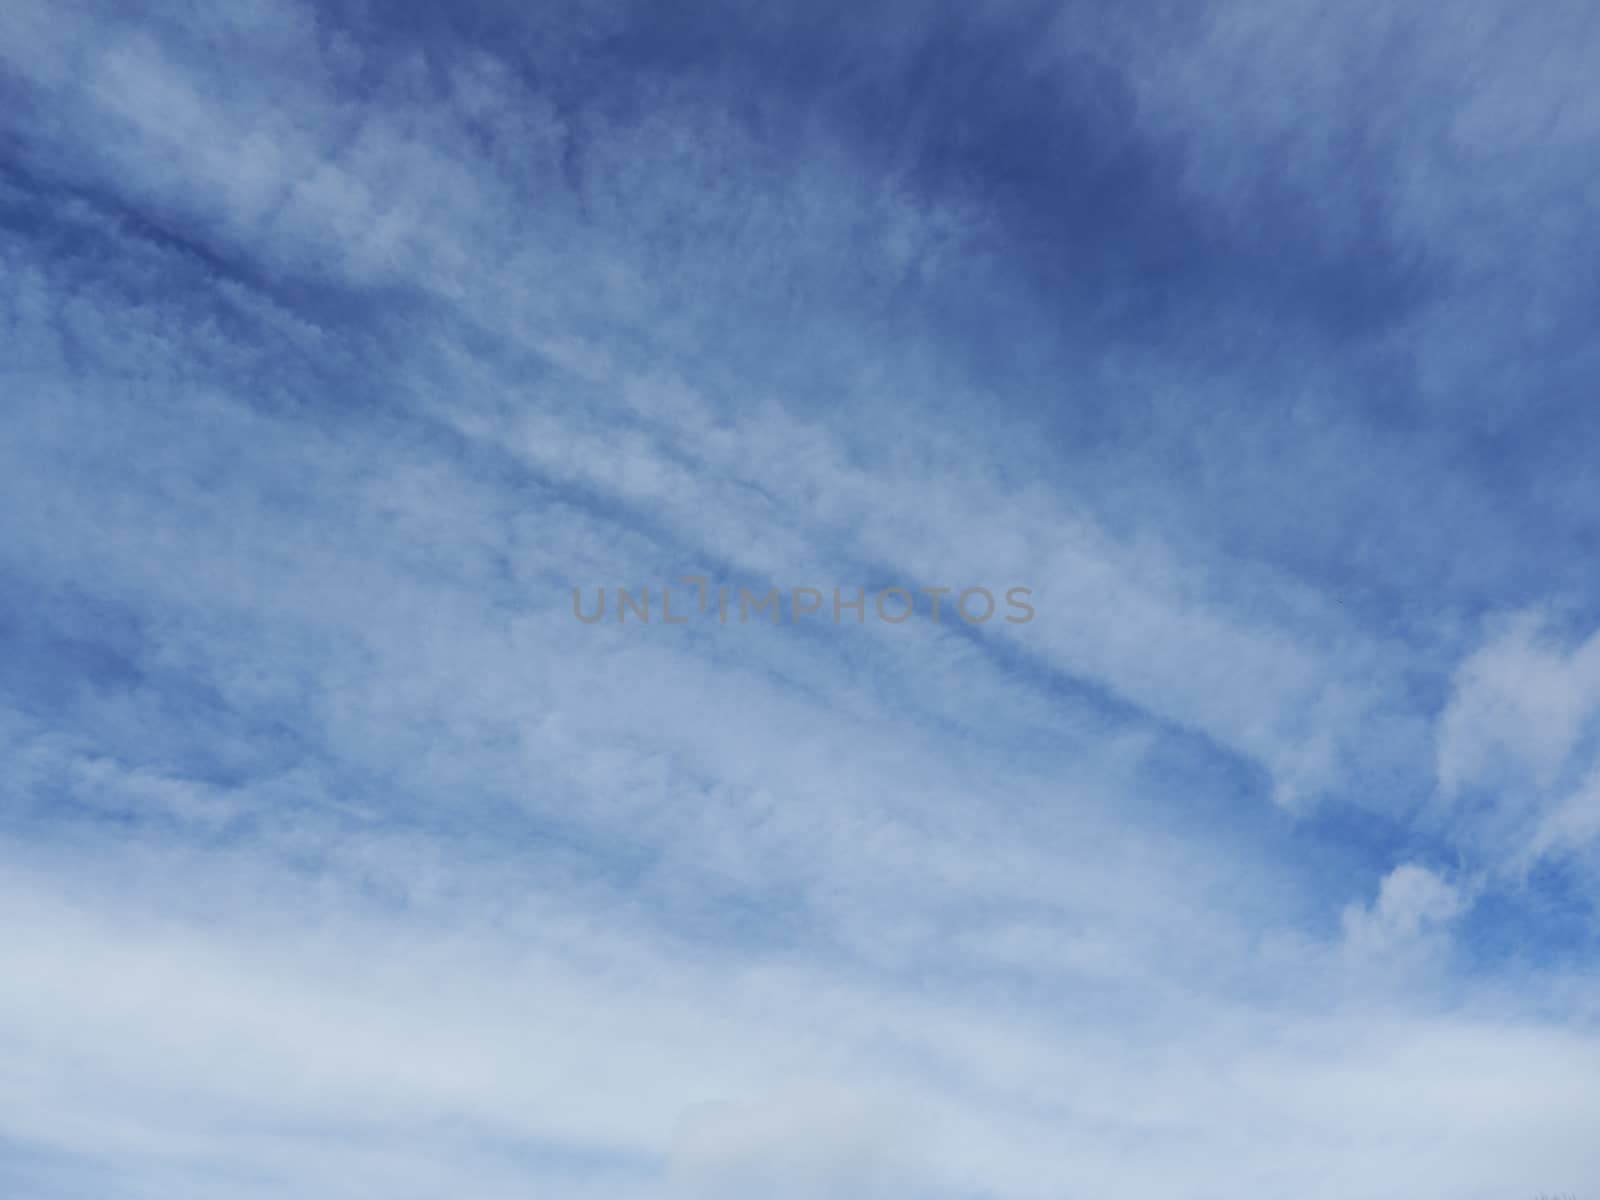 sky replacement, blue sky with diagonal clouds